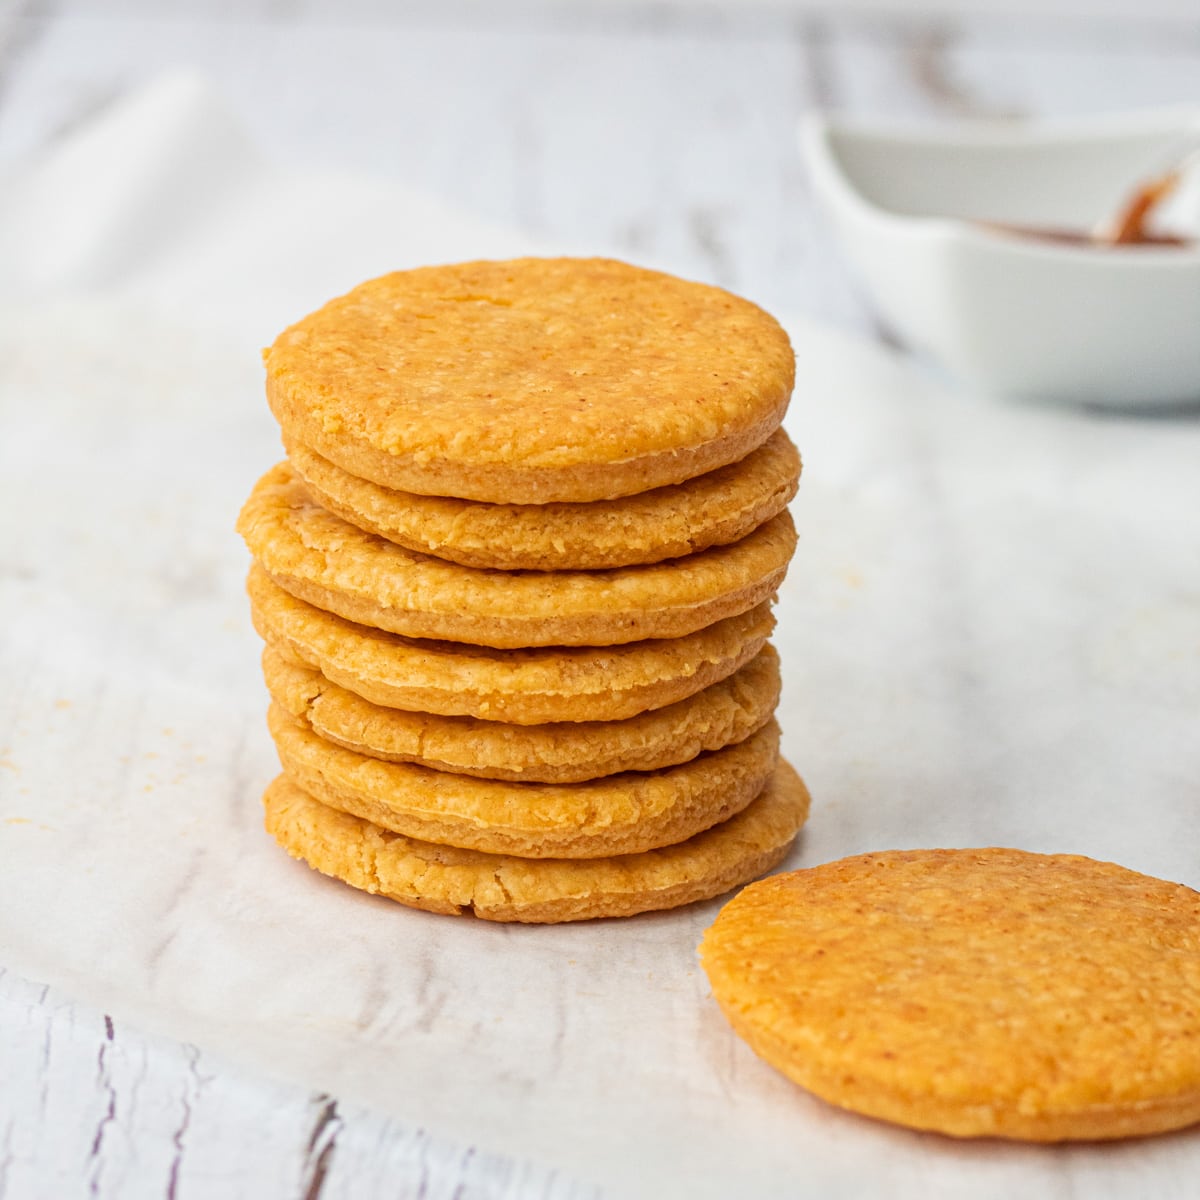 Savoury Biscuit Market Outlook on Key Growth Trends, Factors and Forecast 2032